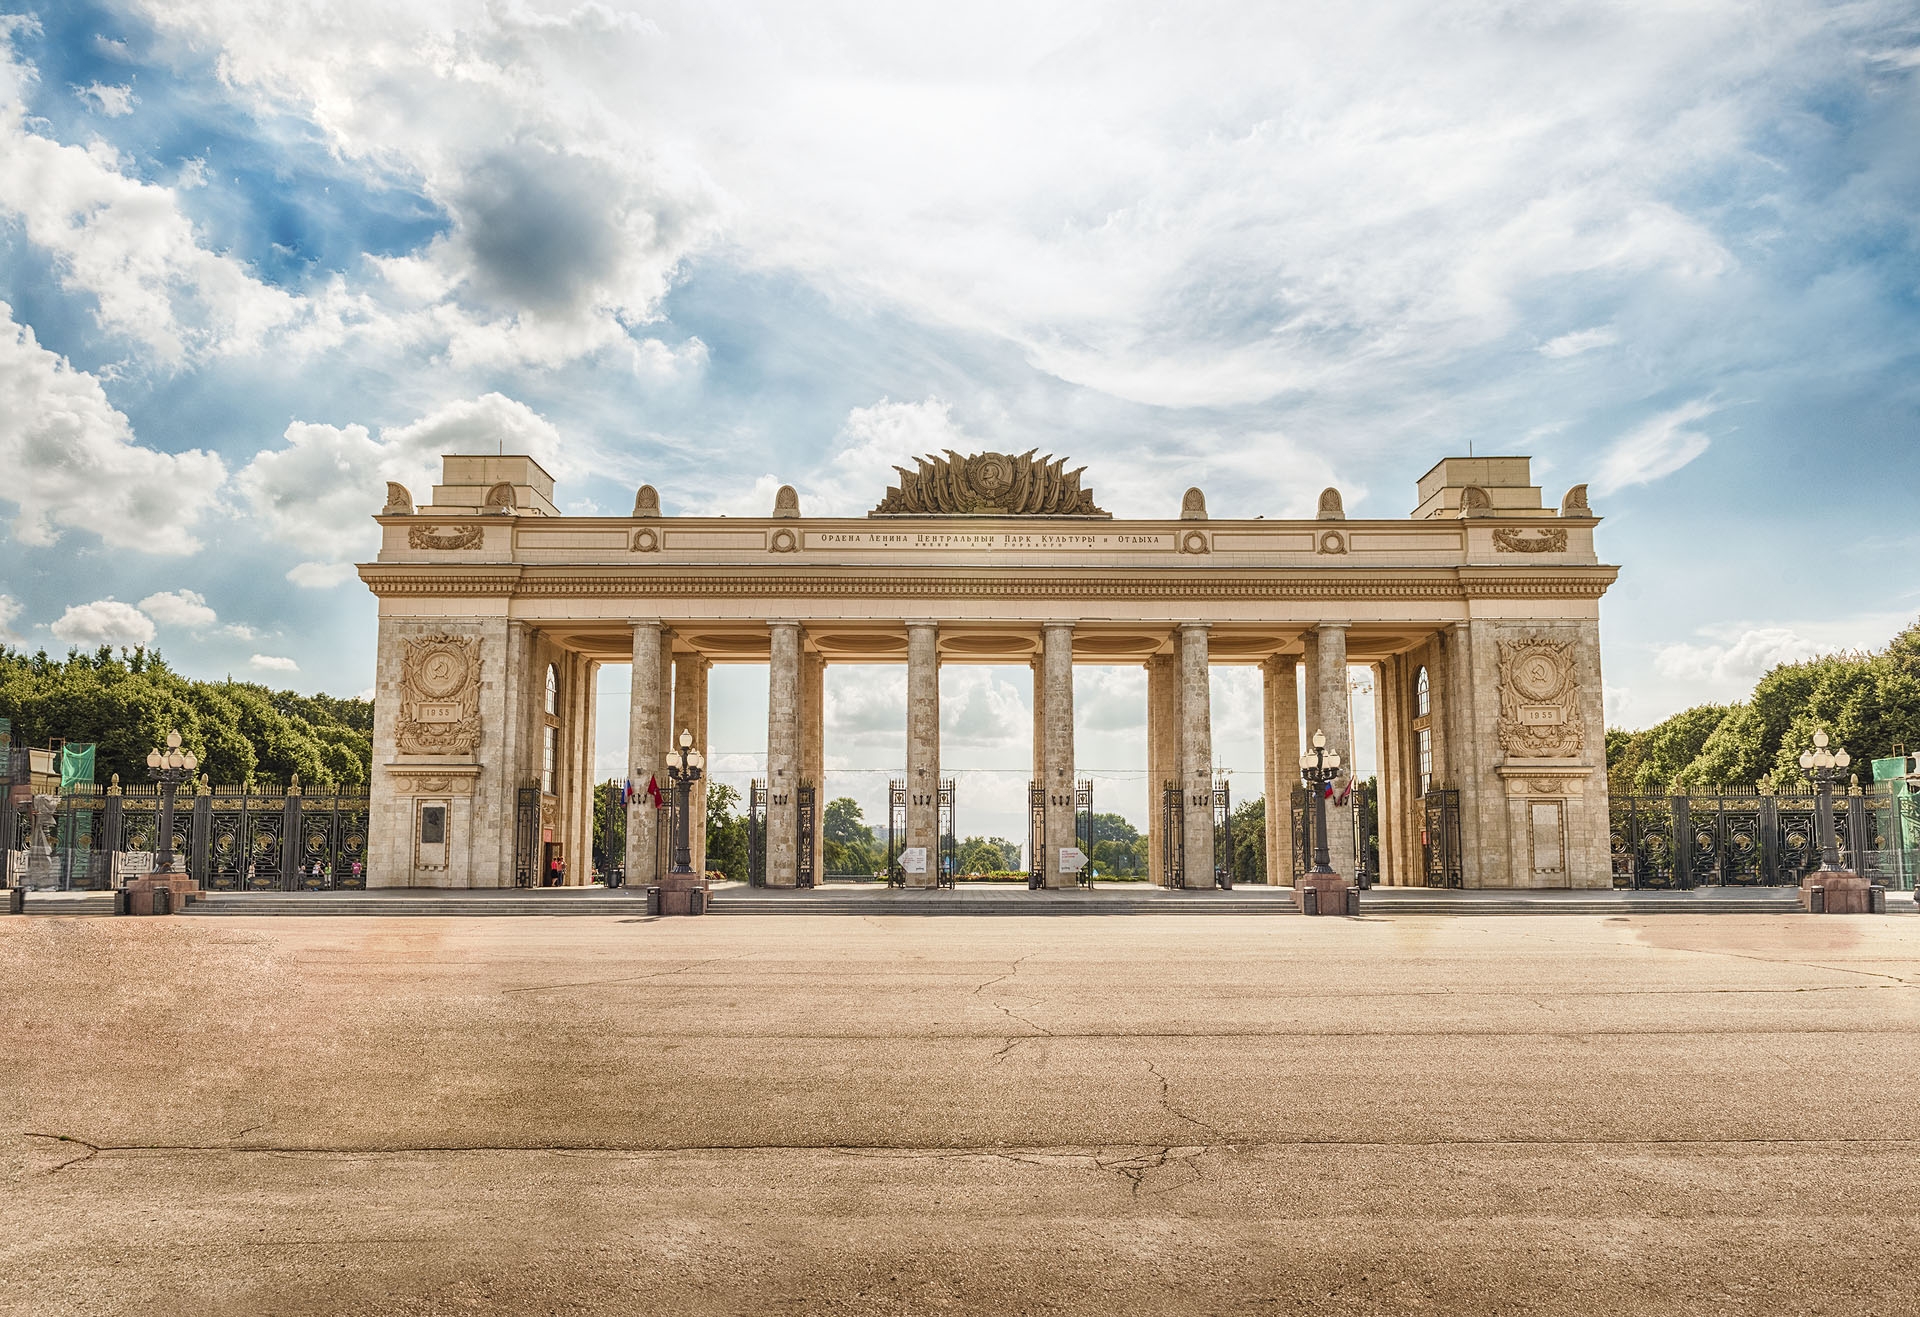 Main entrance gate of the Gorky Park, Moscow, Russia